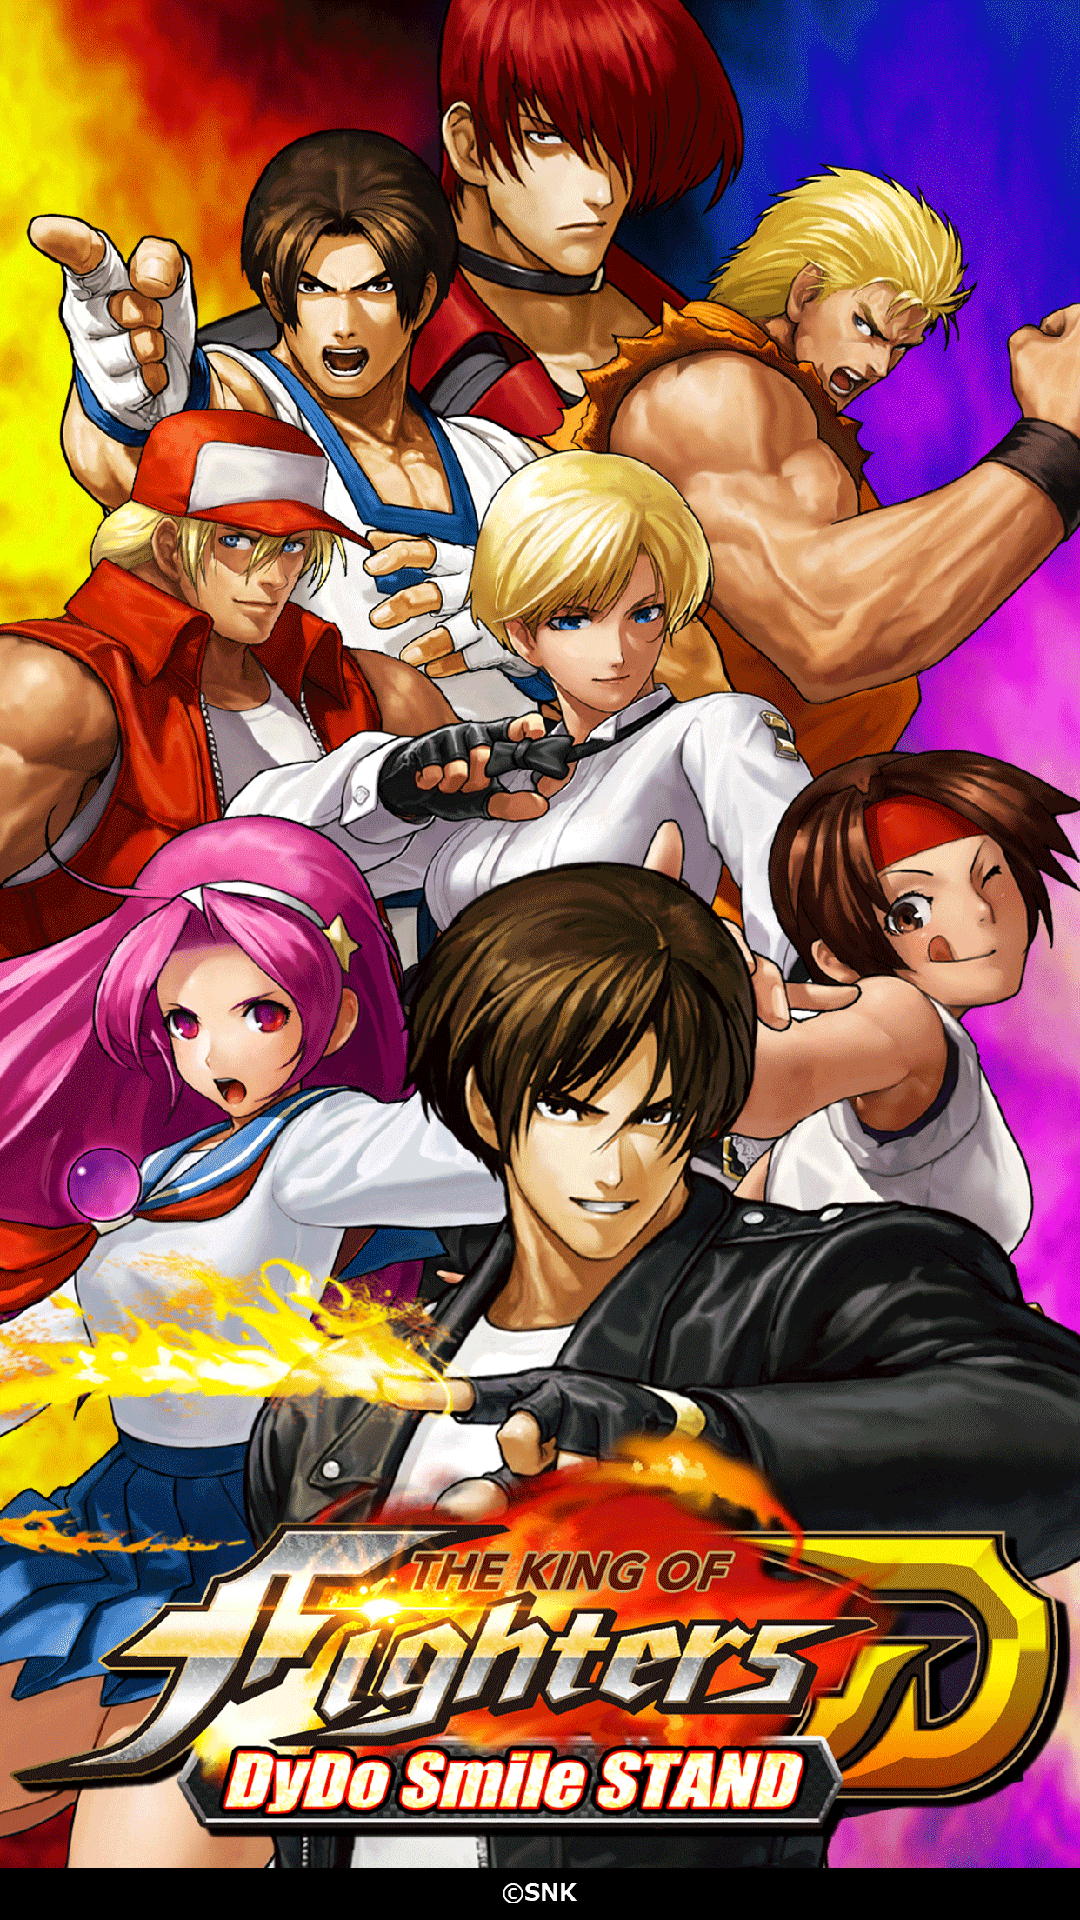 Screenshot 1 of THE KING OF FIGHTERS D ~DyDo 스마일 스탠드~ 